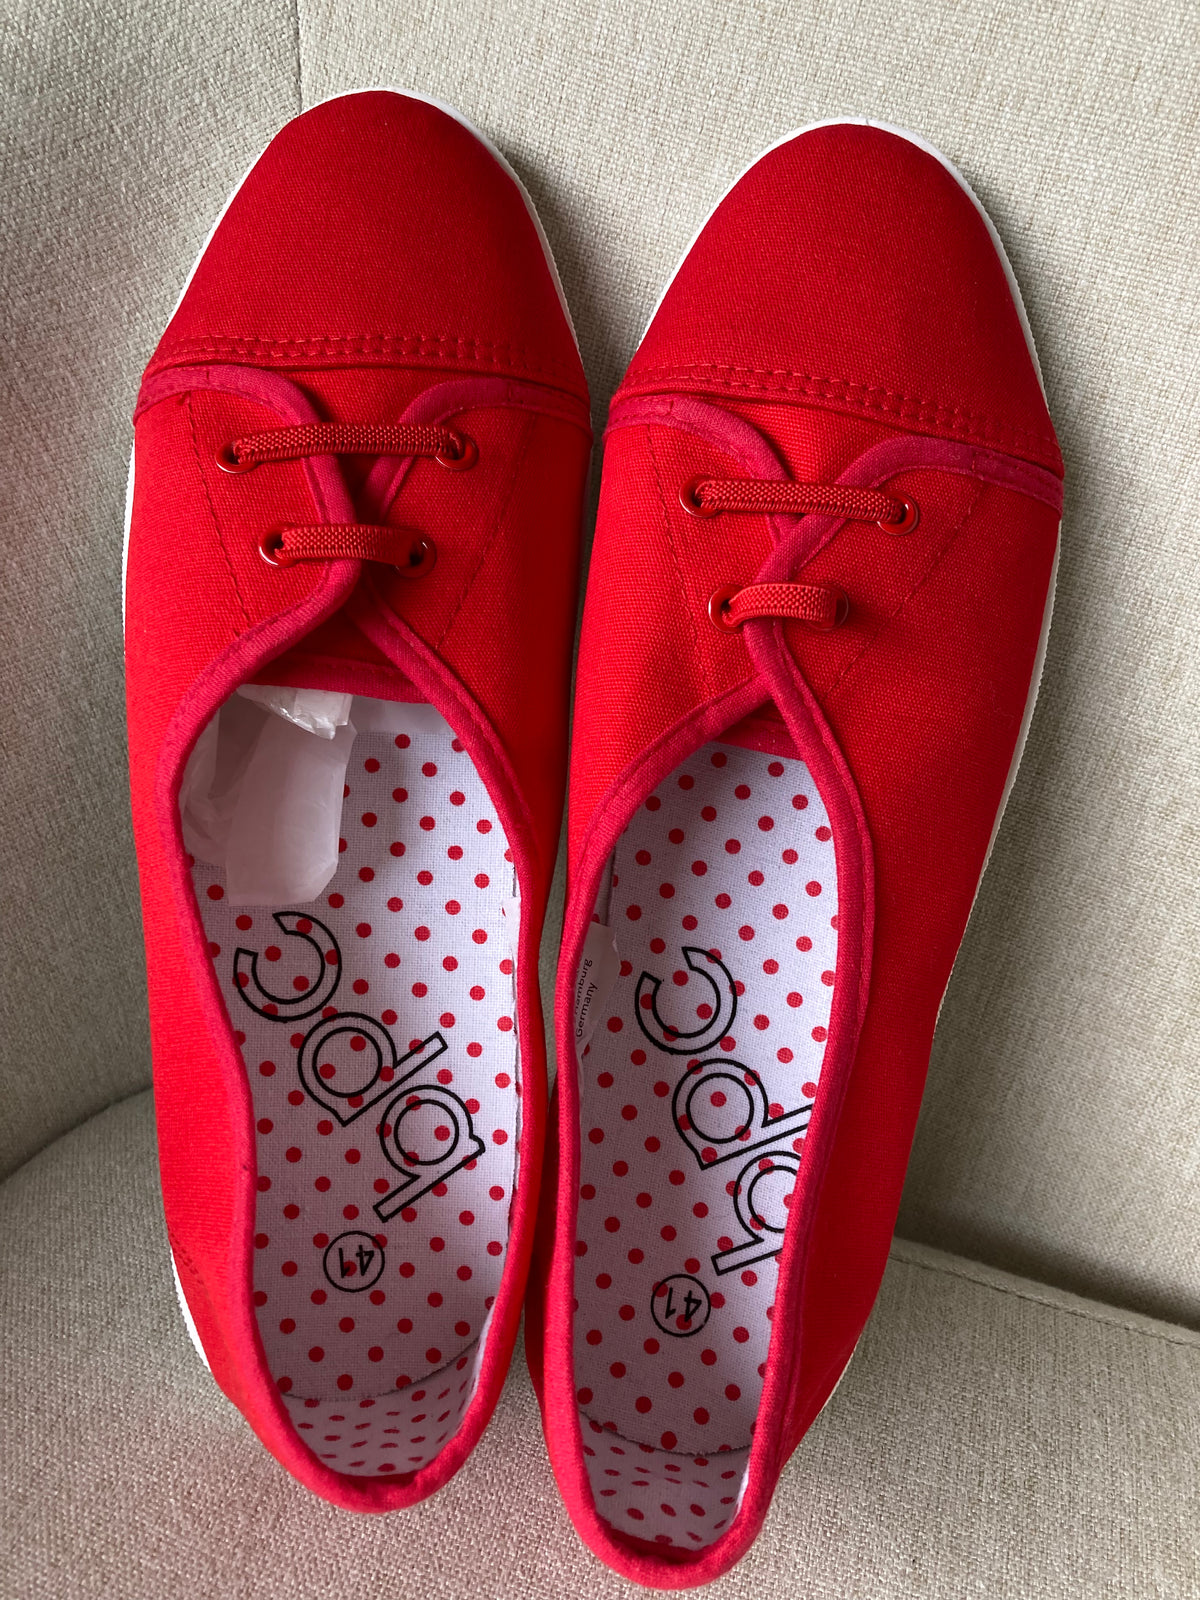 Red flat pumps by BPC size 7